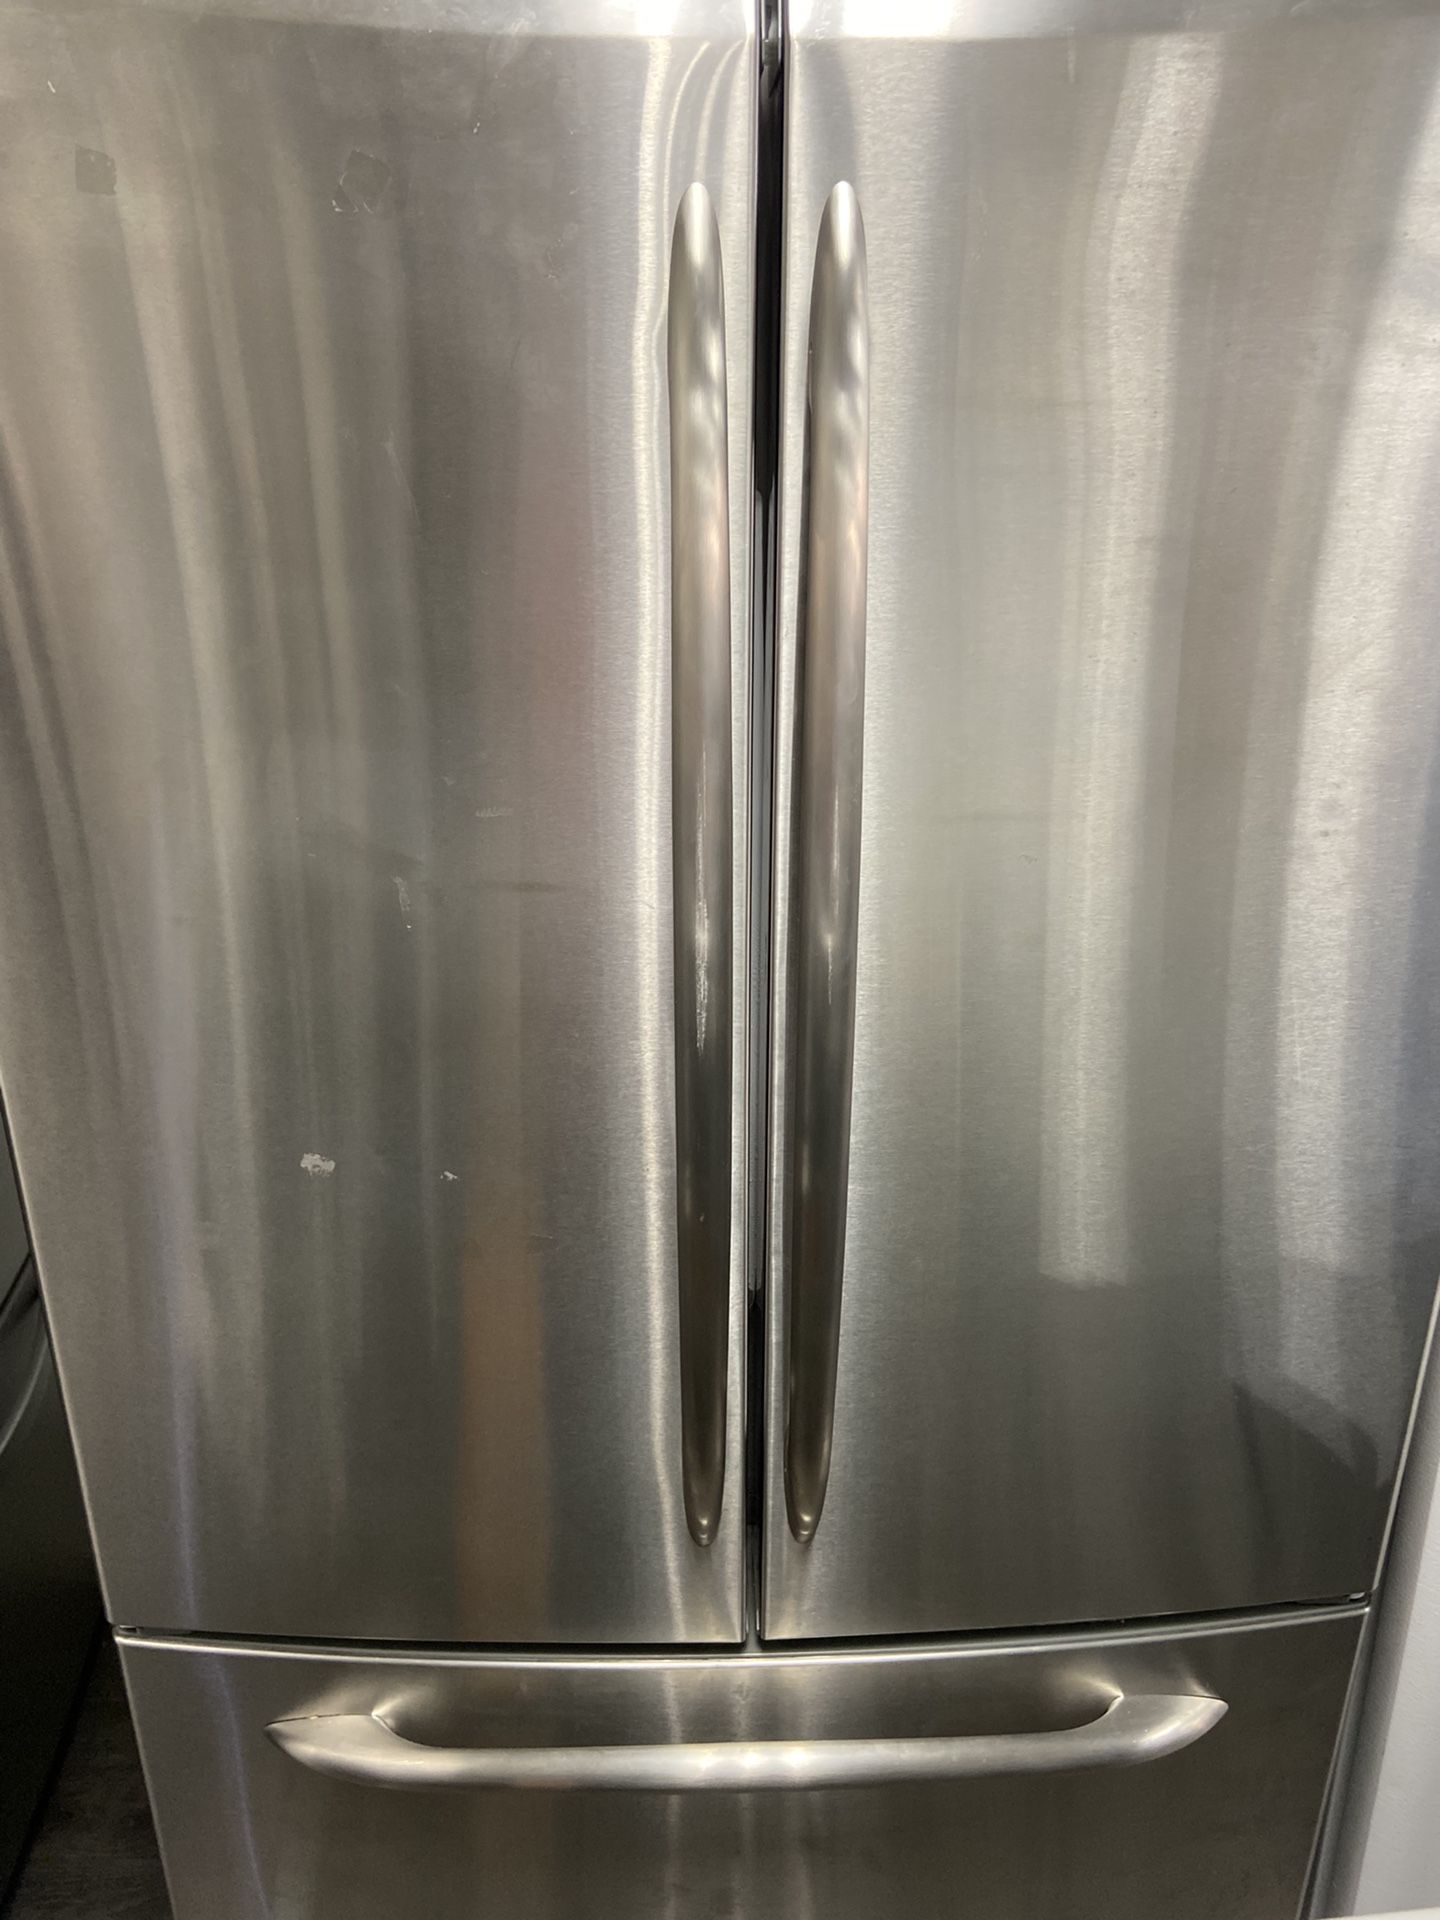 Stainless Steel Refrigerator Samsung 33”69”(3 Months Guaranteed 